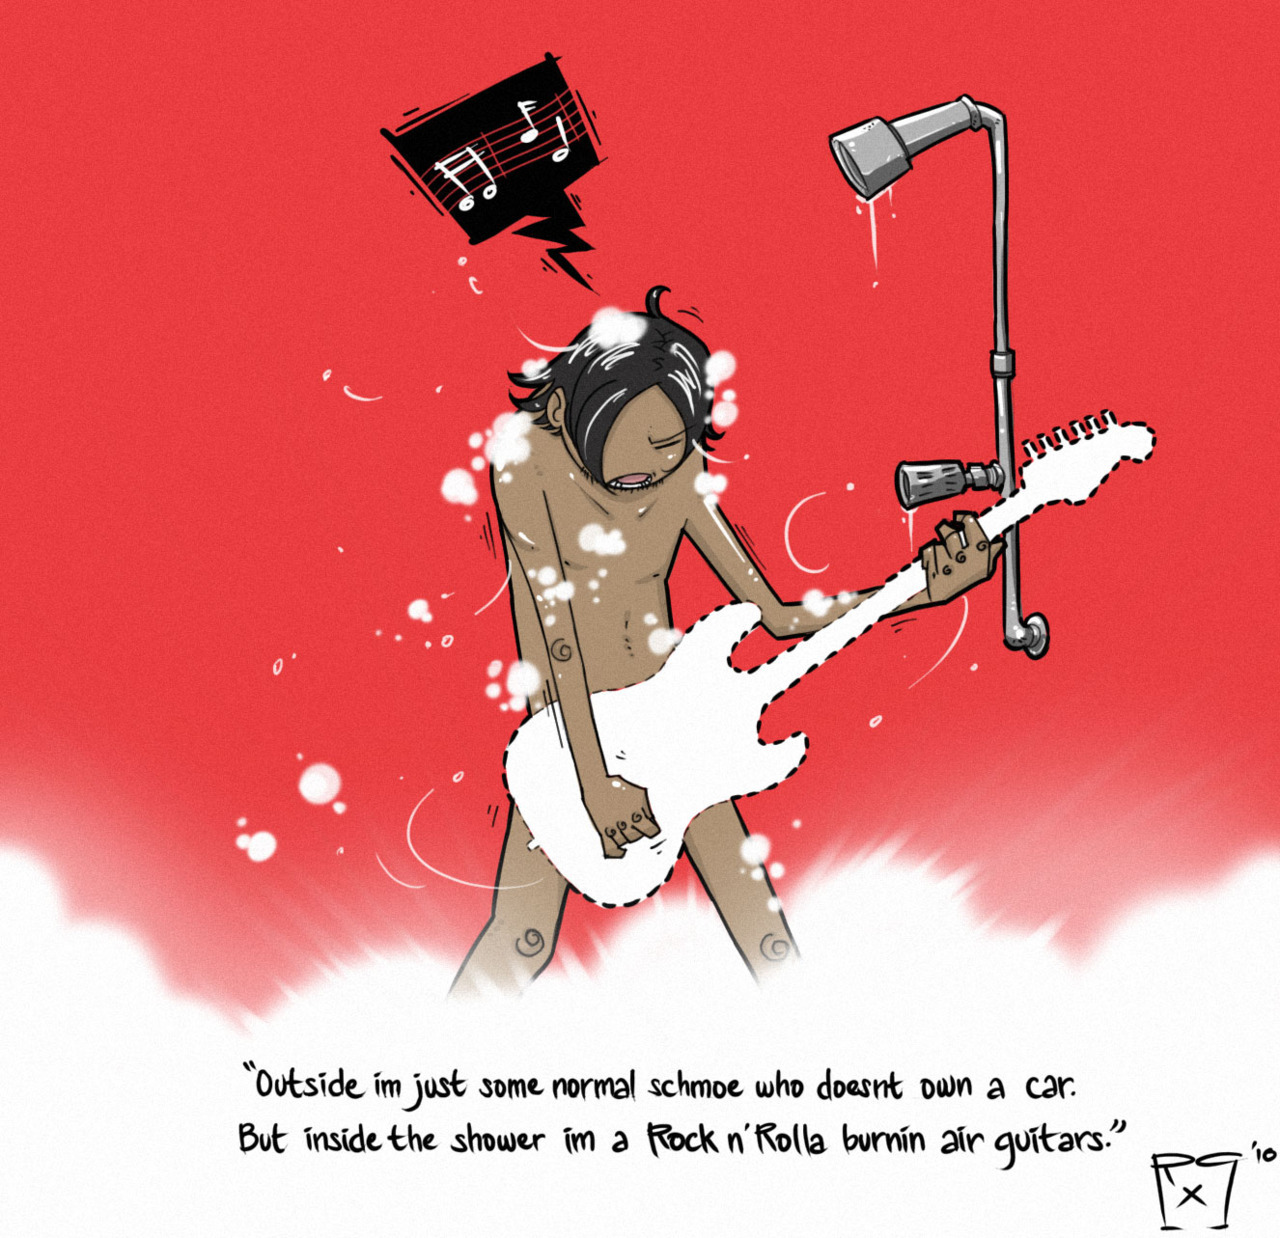 A tribute to all fellow shower rockstars all over the world. Keep rockin and blastin those four sided tiled walls.